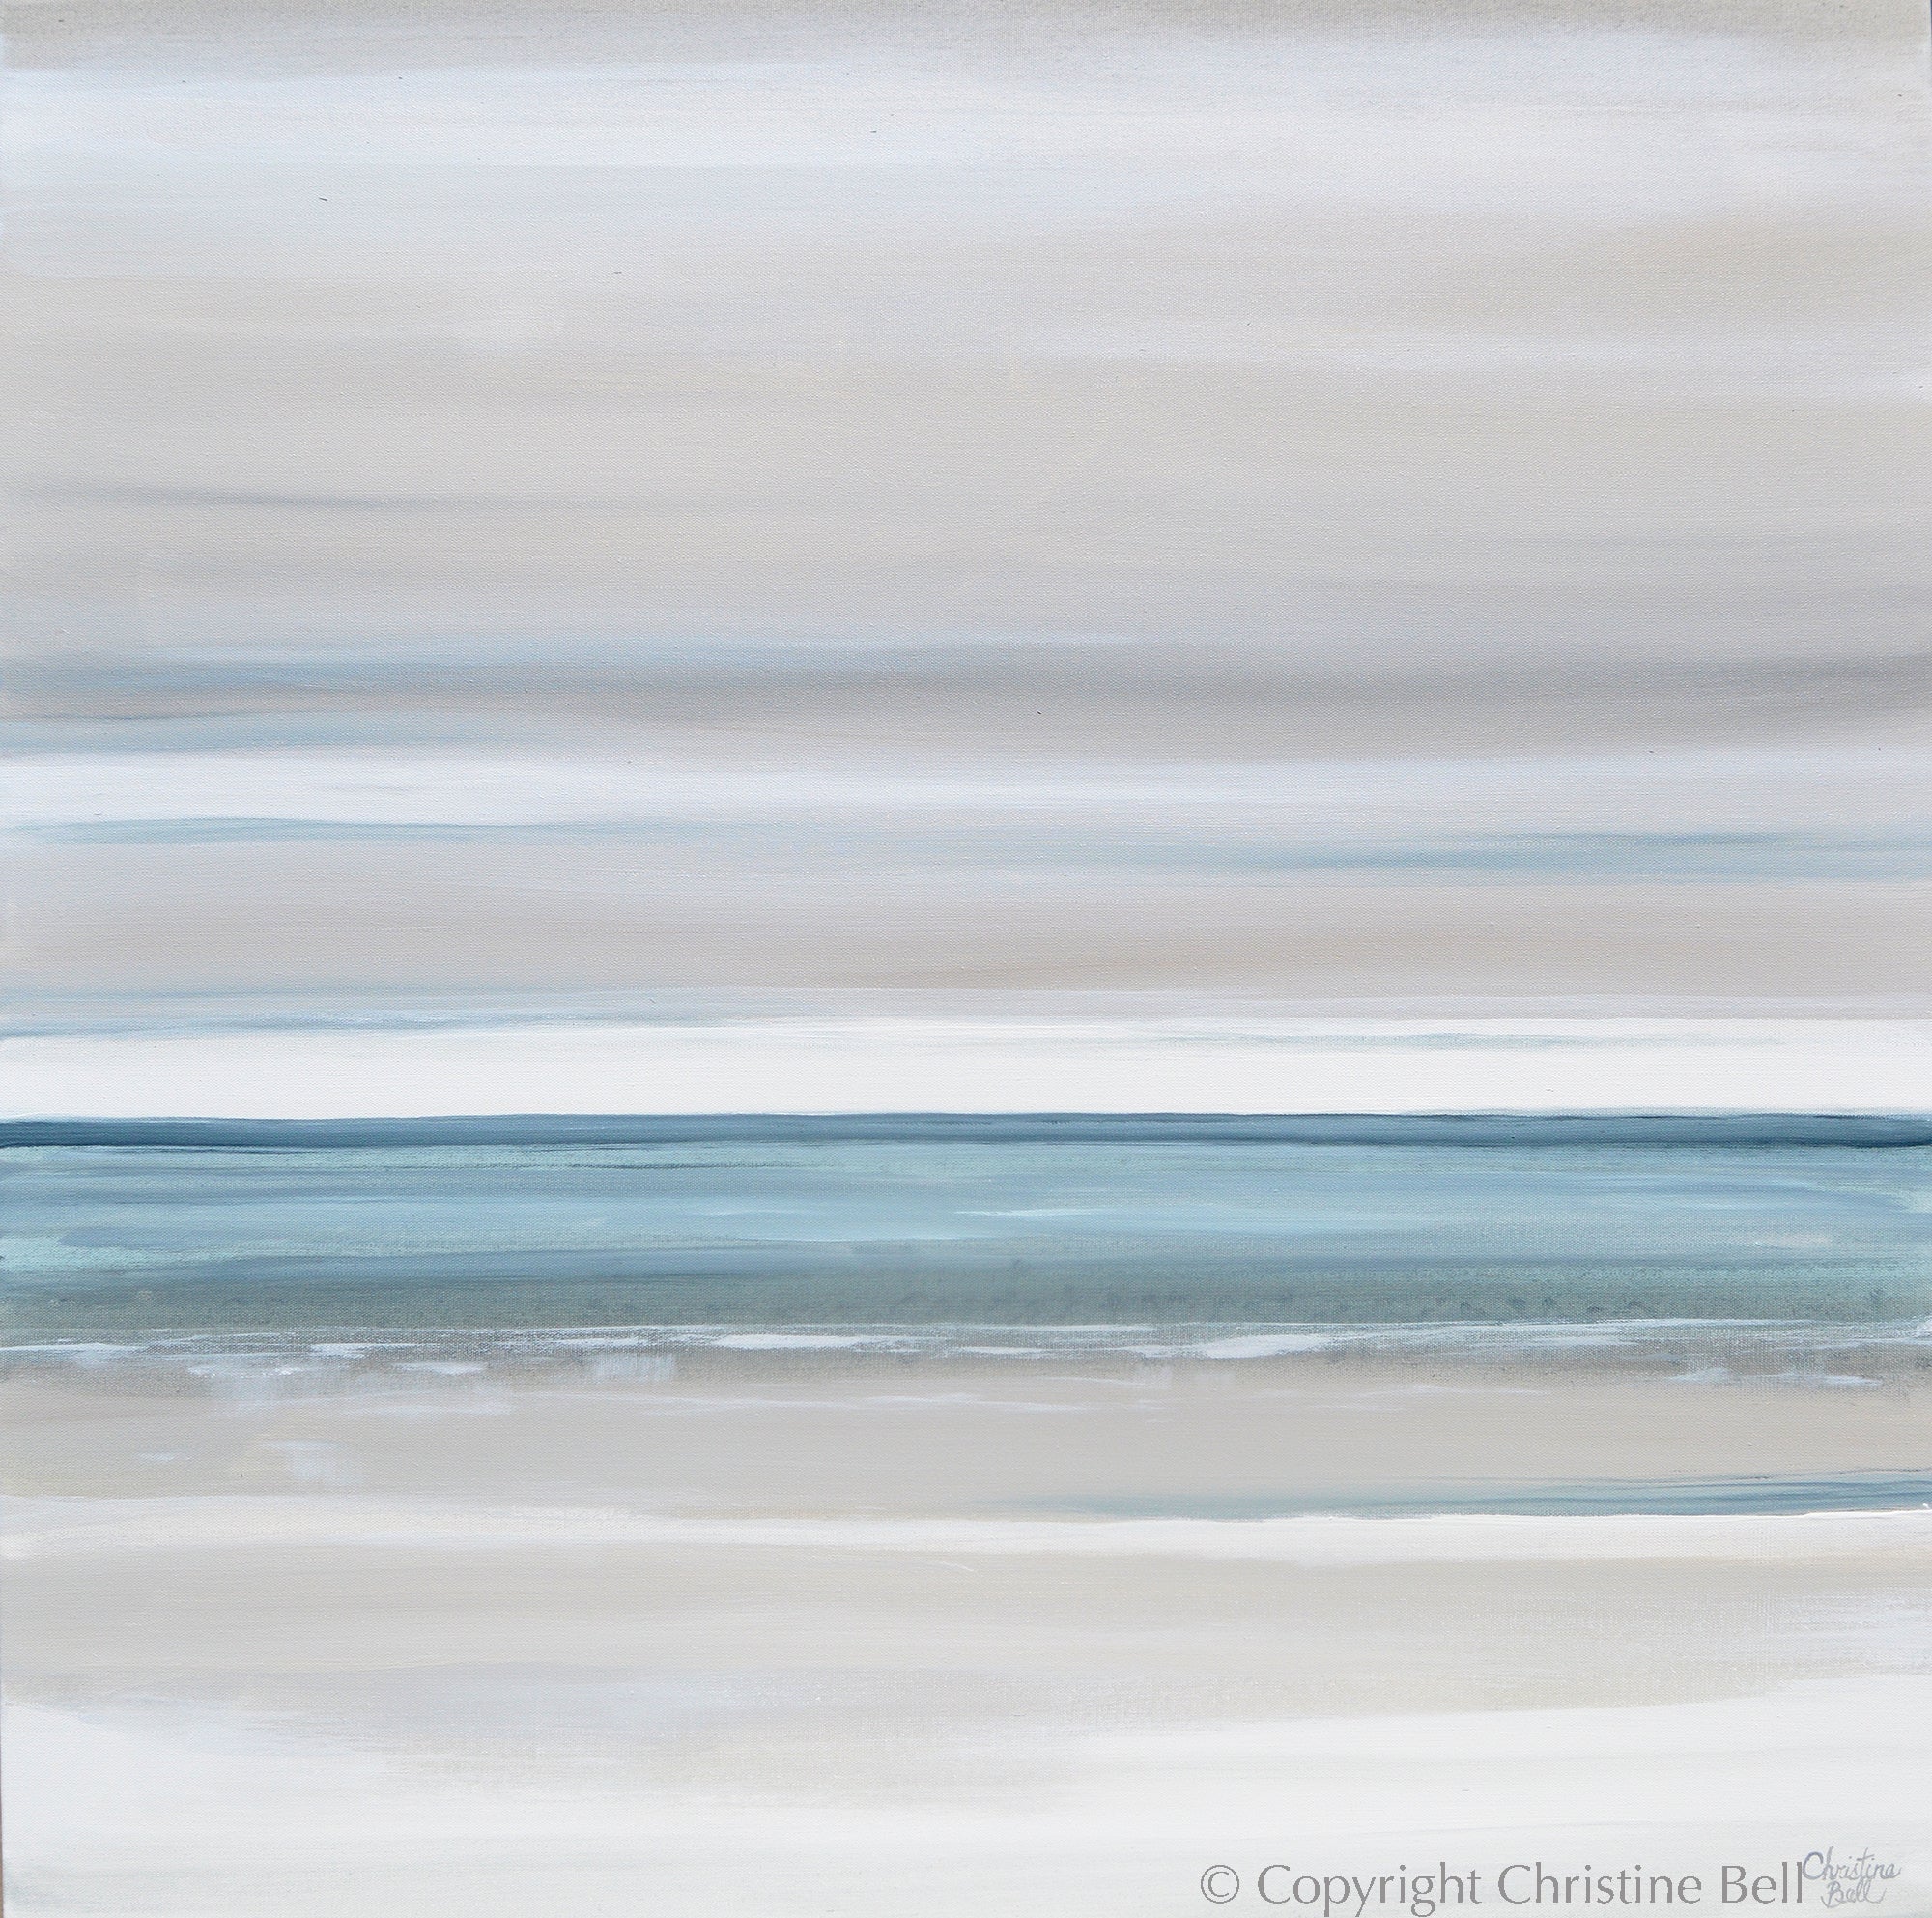 "Marine Layer" GICLEE PRINT Coastal Abstract Painting - 16x16" / Gicle Stretched Canvas Print